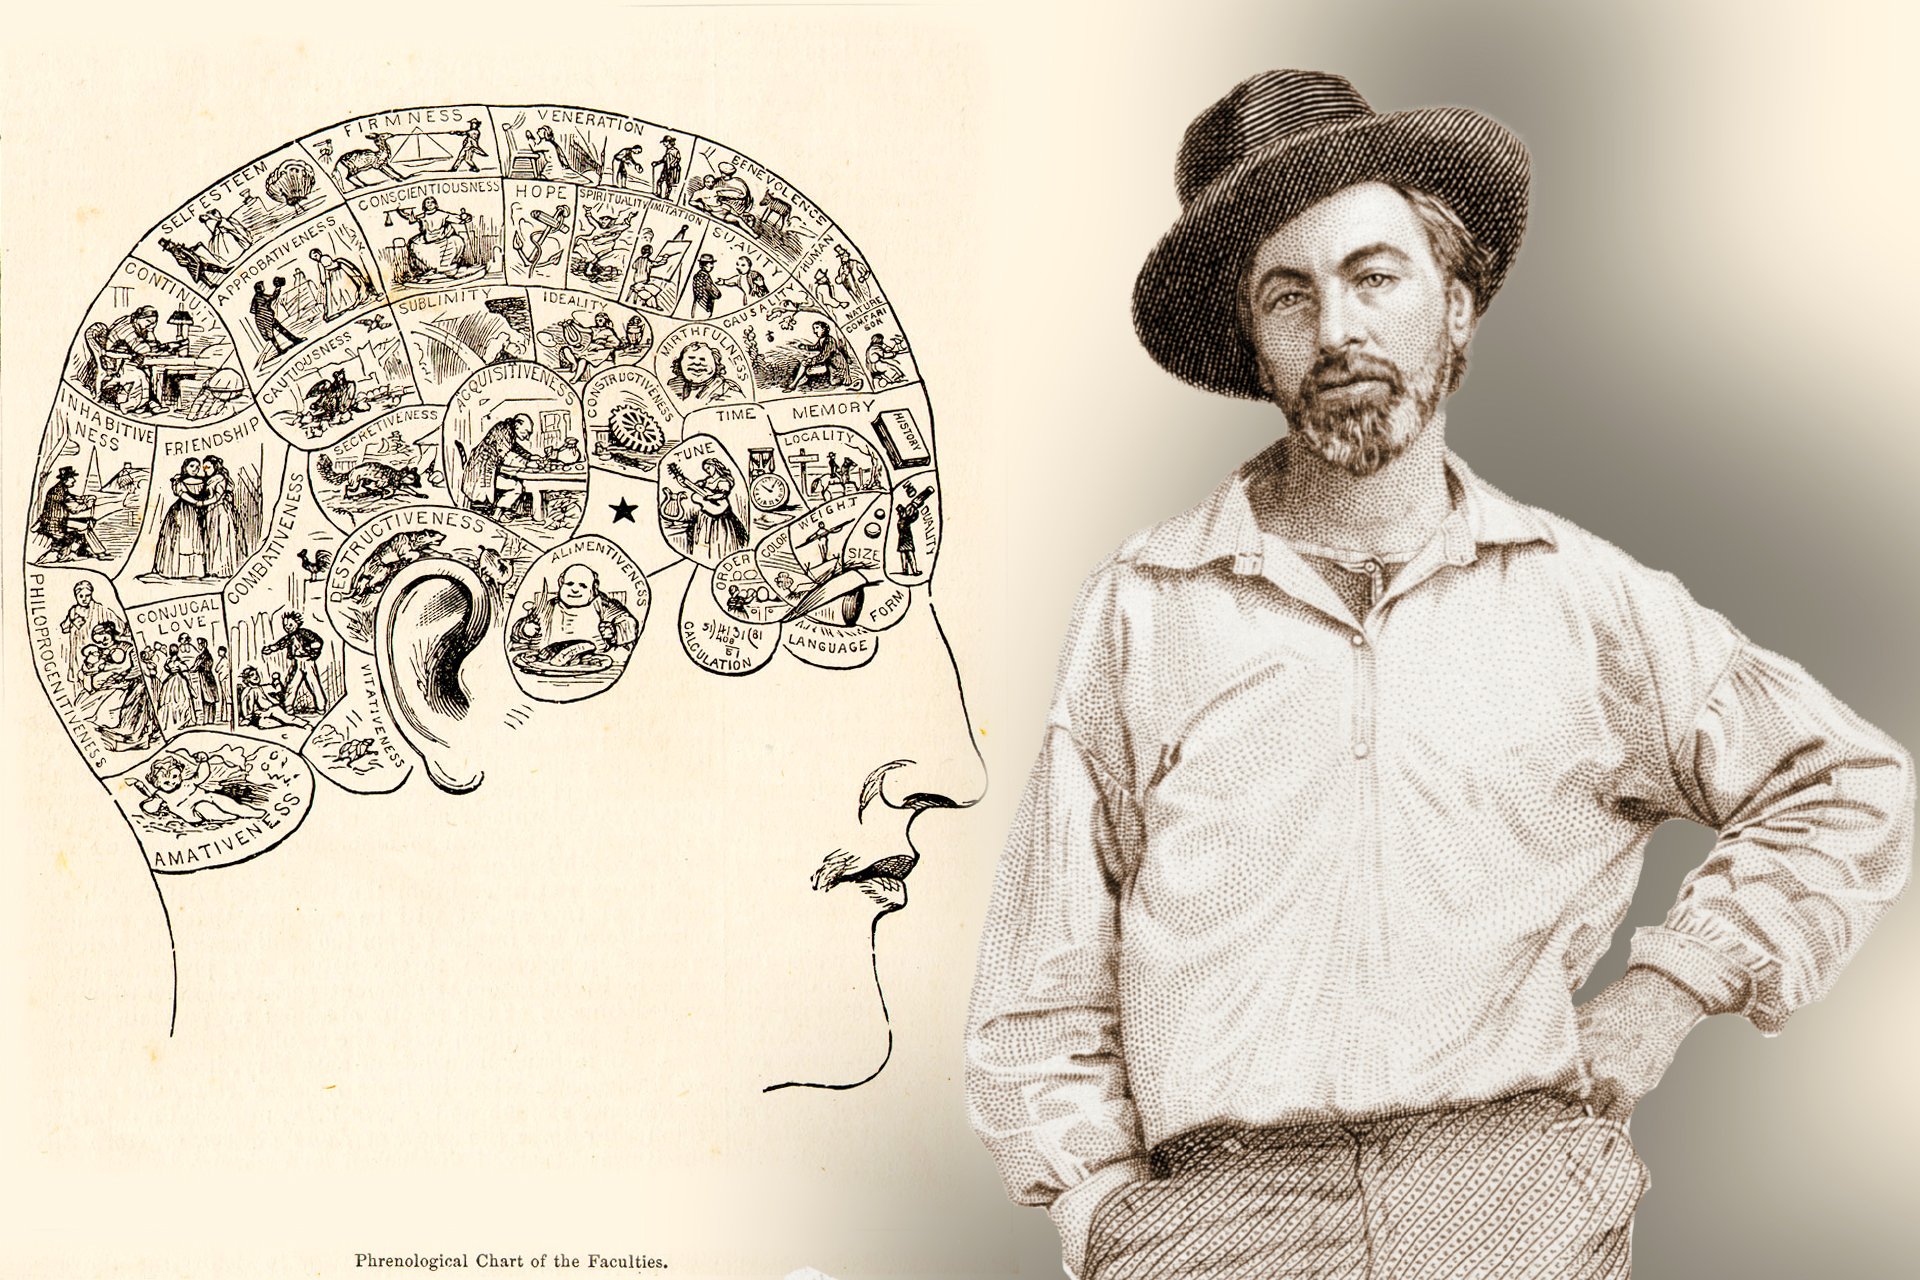 A collage of two black and white images, one of a phrenology chart and one of Walt Whitman. The phrenology chart is a human head with different sections, each with an illustration and a label of a mental faculty, such as “Imitation”, “Benevolence”, or “Causality”. The chart is labeled “Phrenological Chart of the Faculties.” Walt Whitma is wearing a white shirt and a hat.